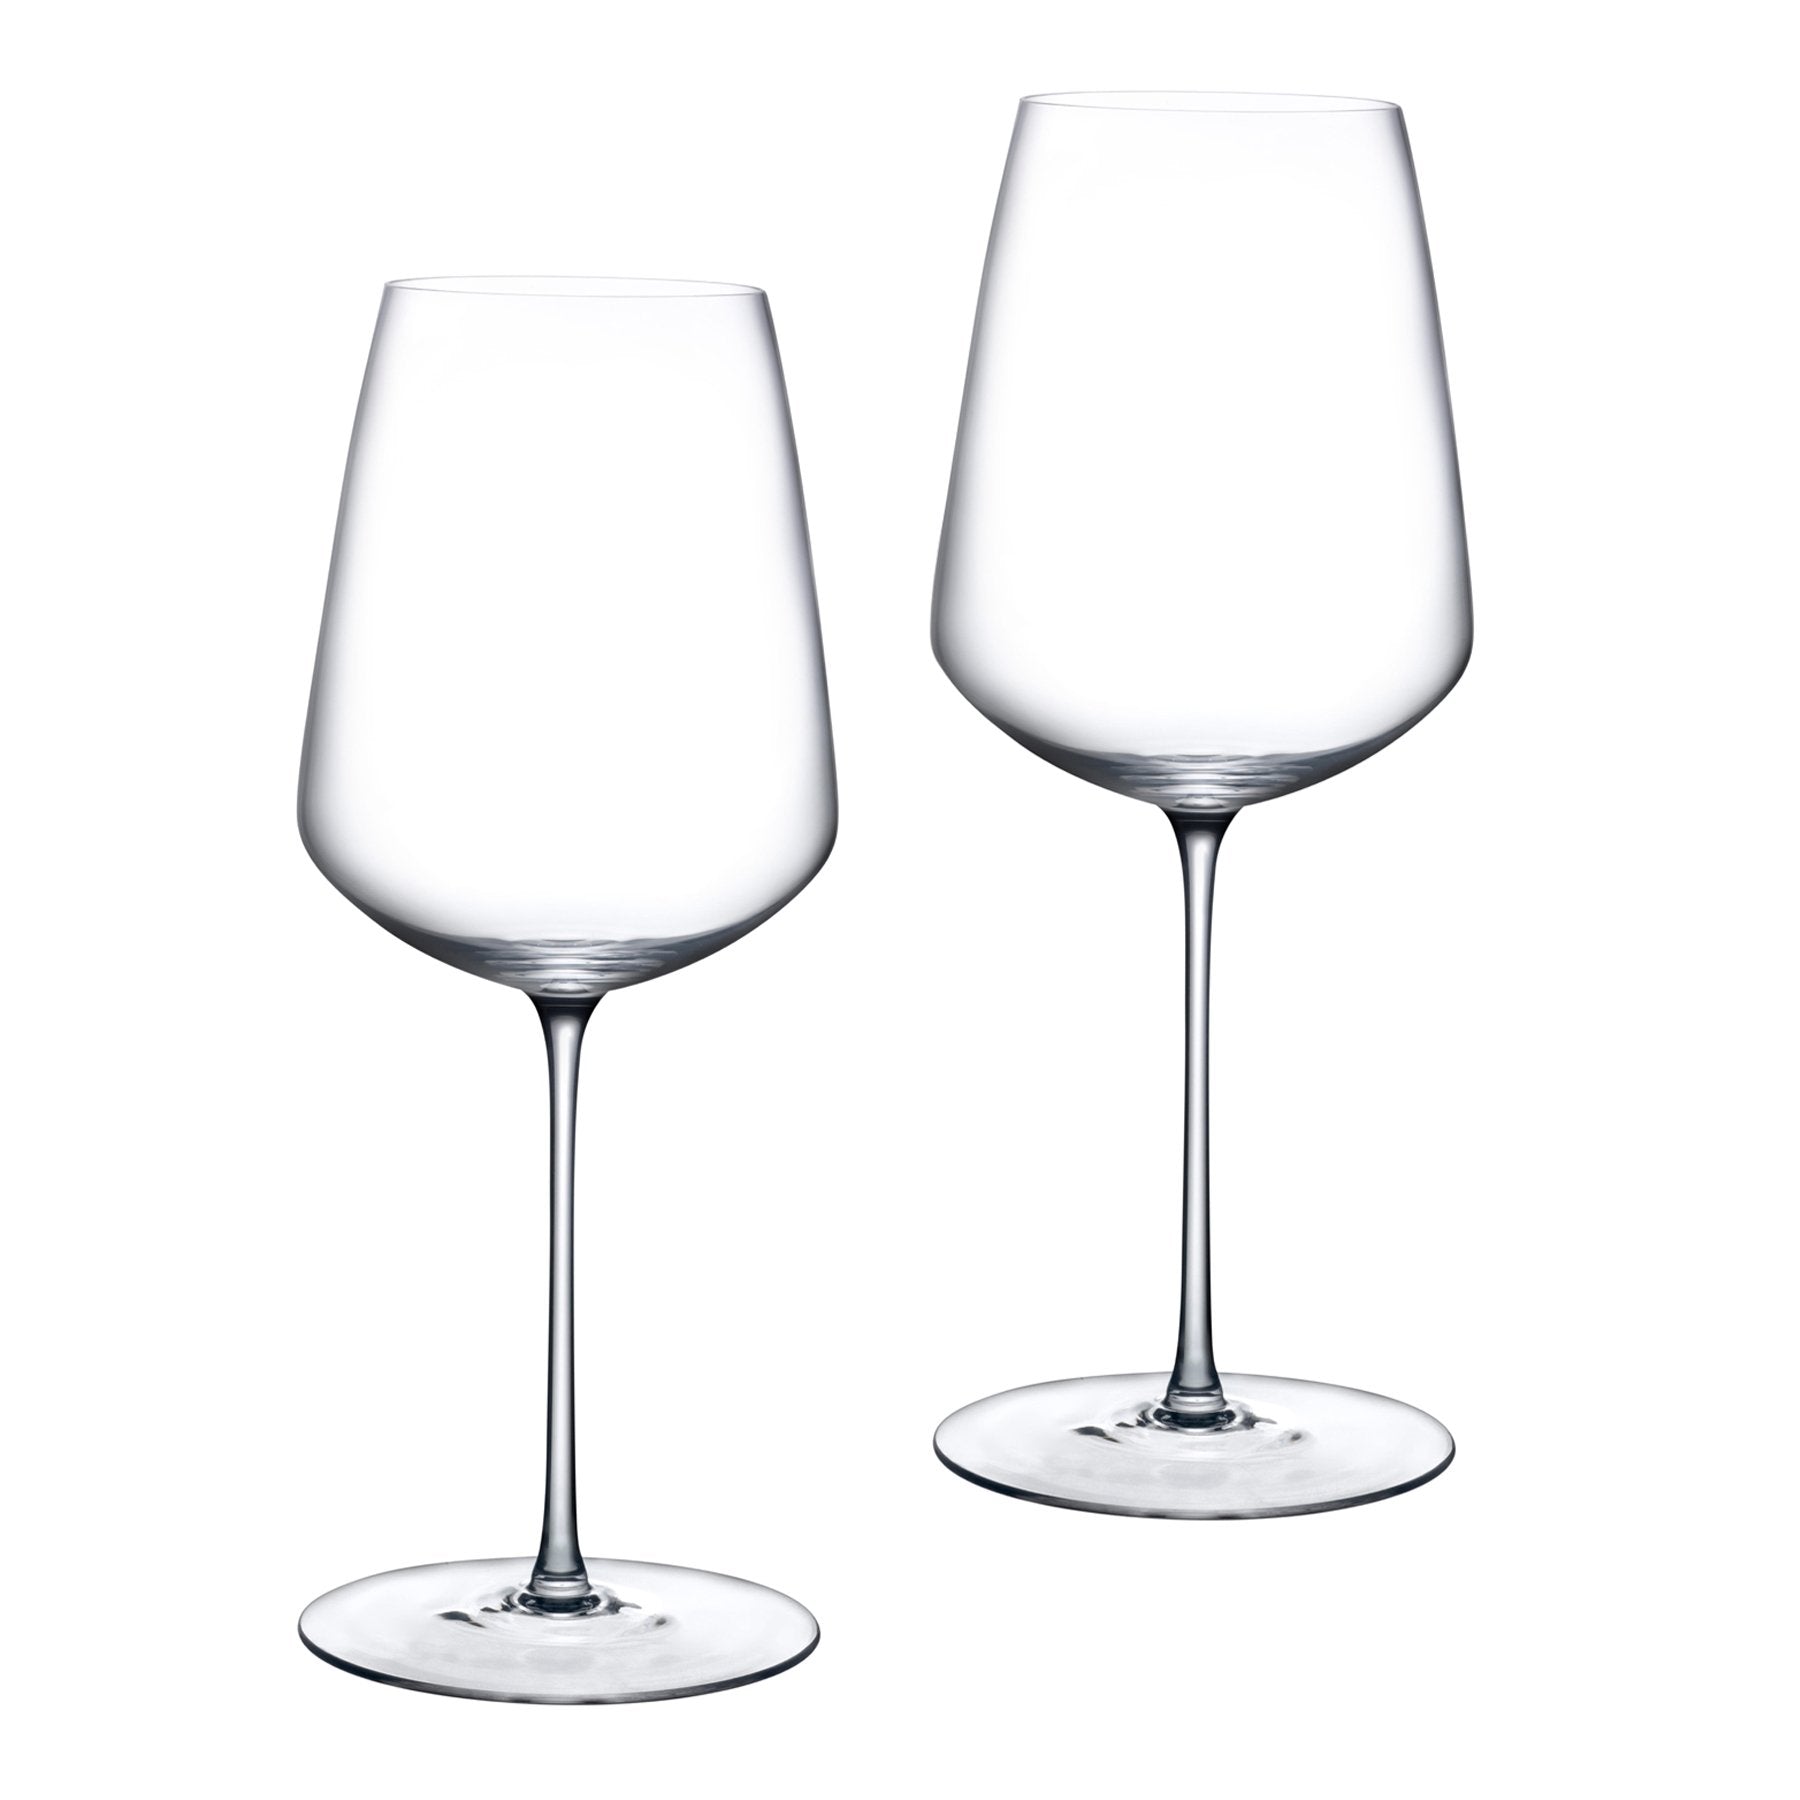 Nude Glass - Round Up Red Wine Glasses - Set of 2 Clear